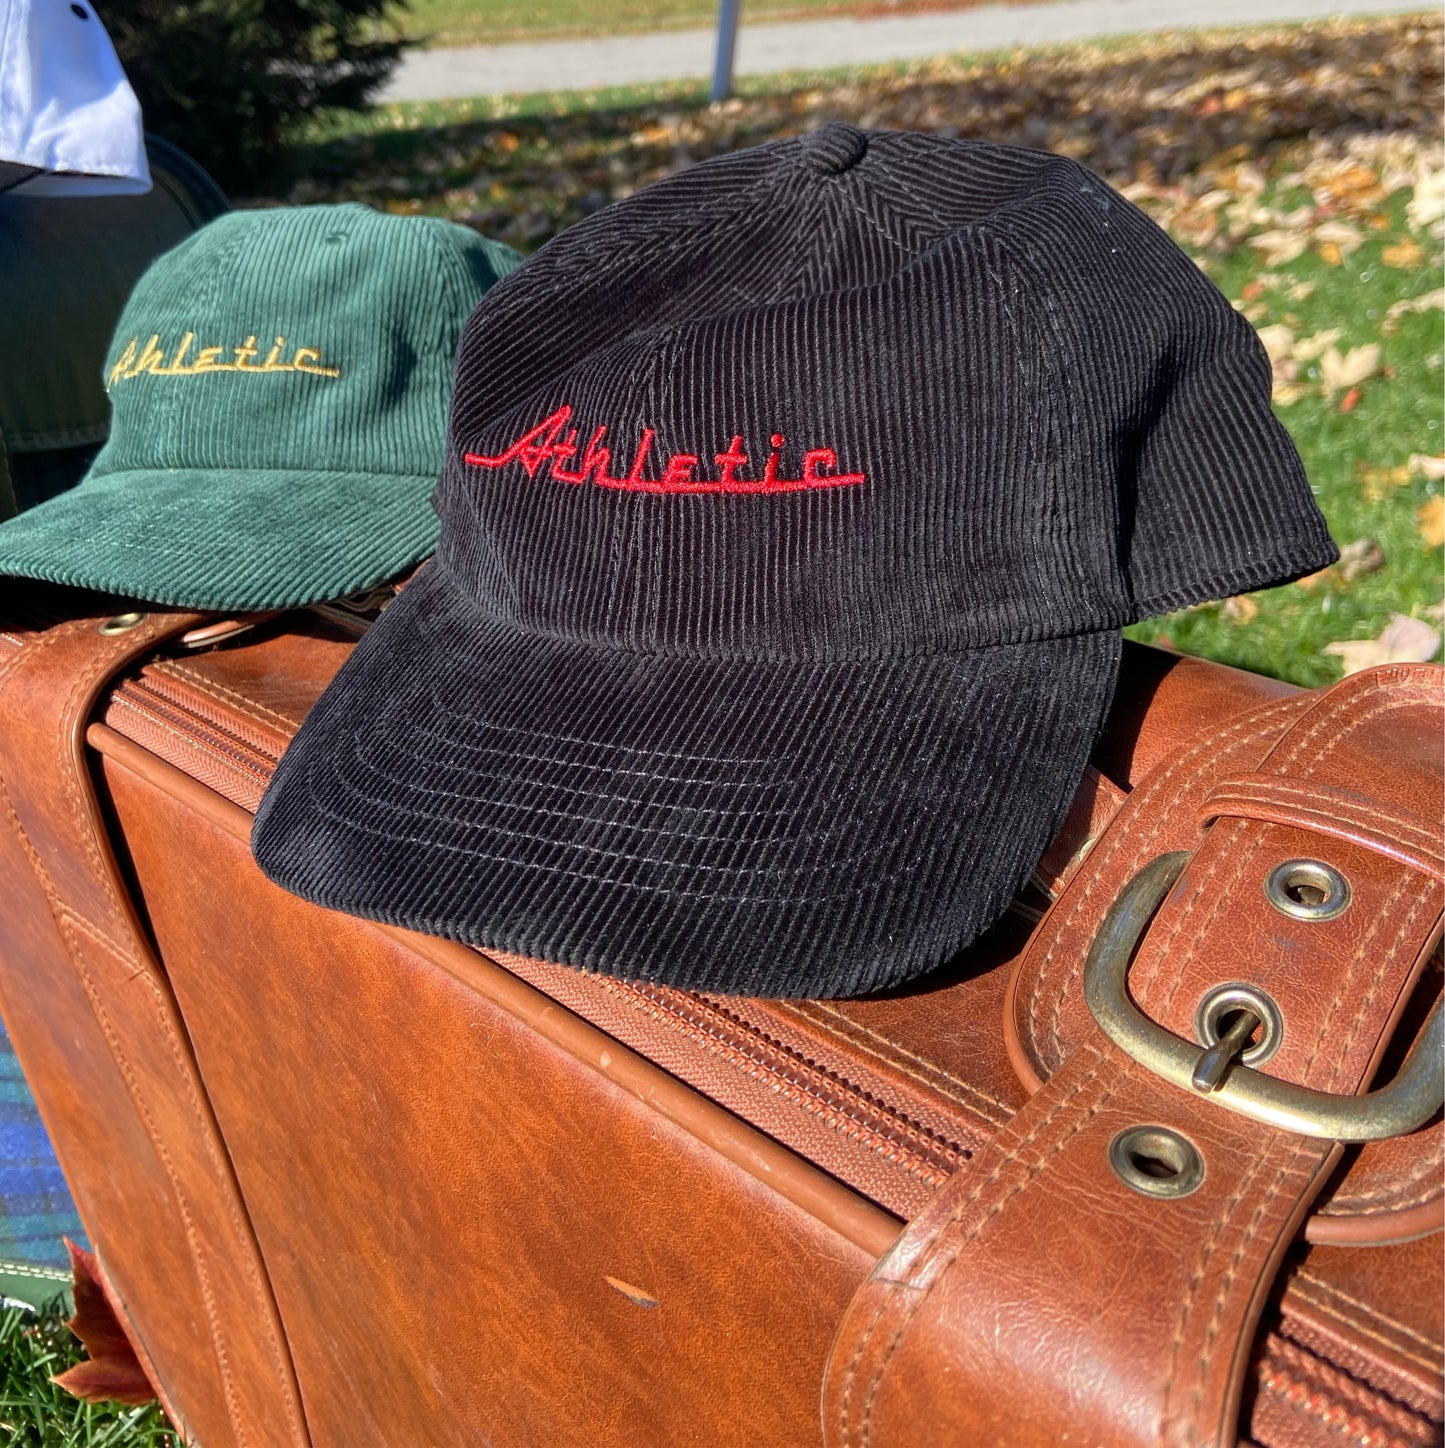 Black corduroy hat with red Athletic and Affluent branding spelling, "Athletic" in our classic racer font. It placed on a vintage leather suitcase on a bright fall morning next to AA Club's "Green Cord Cap"